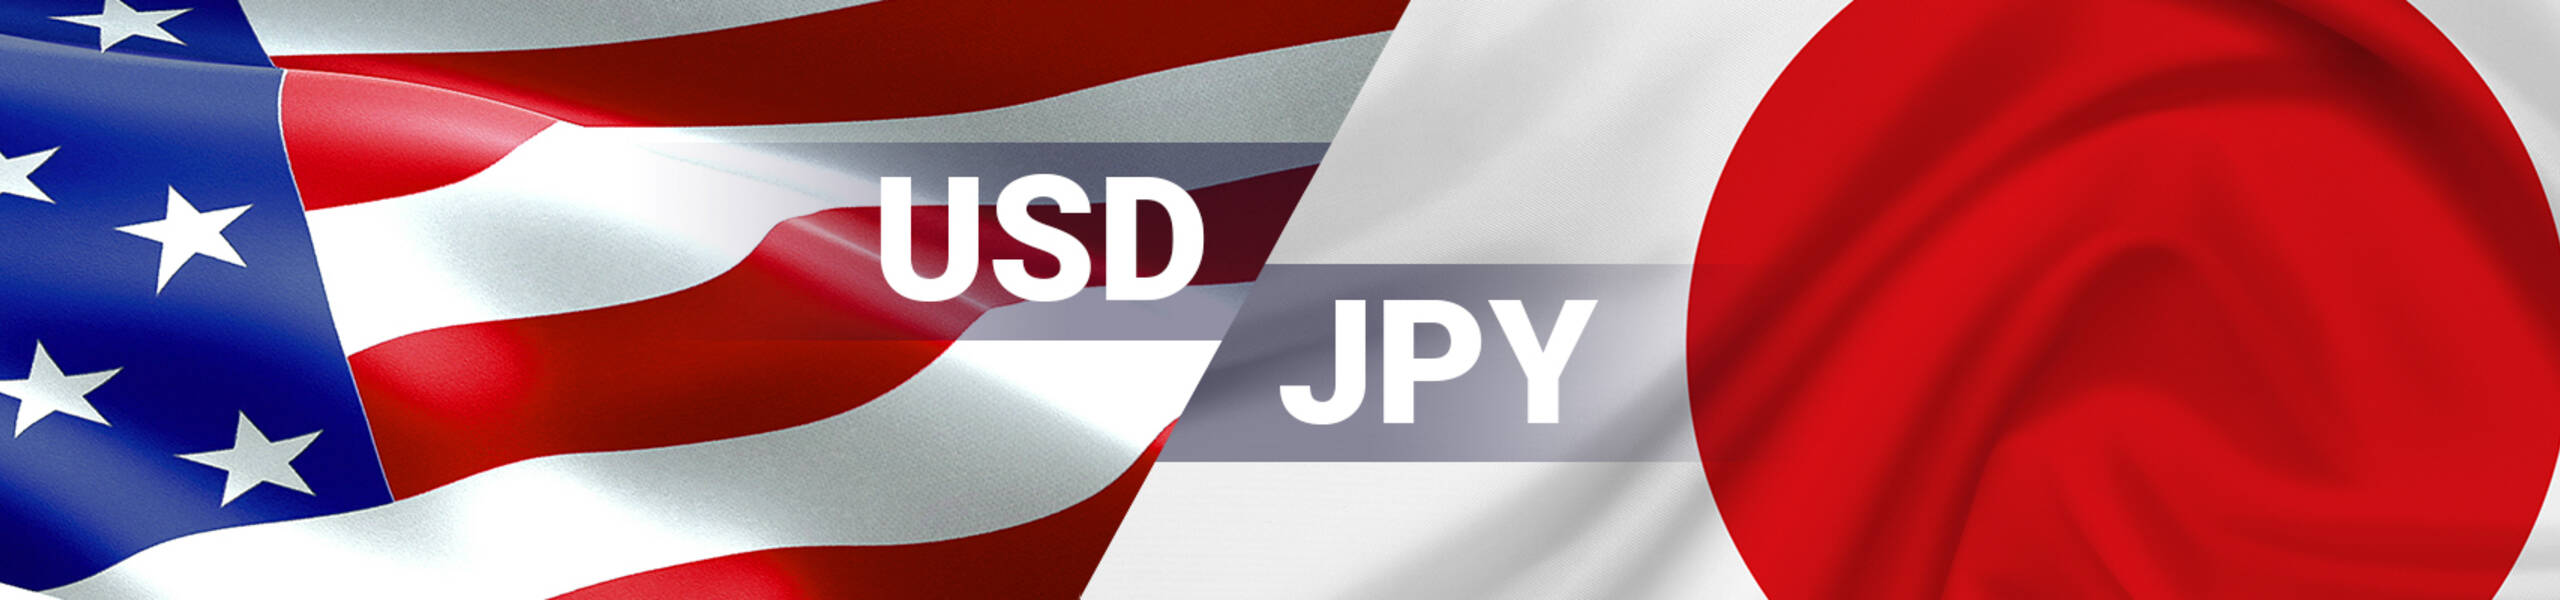 USD/JPY looking to strengthen the bears